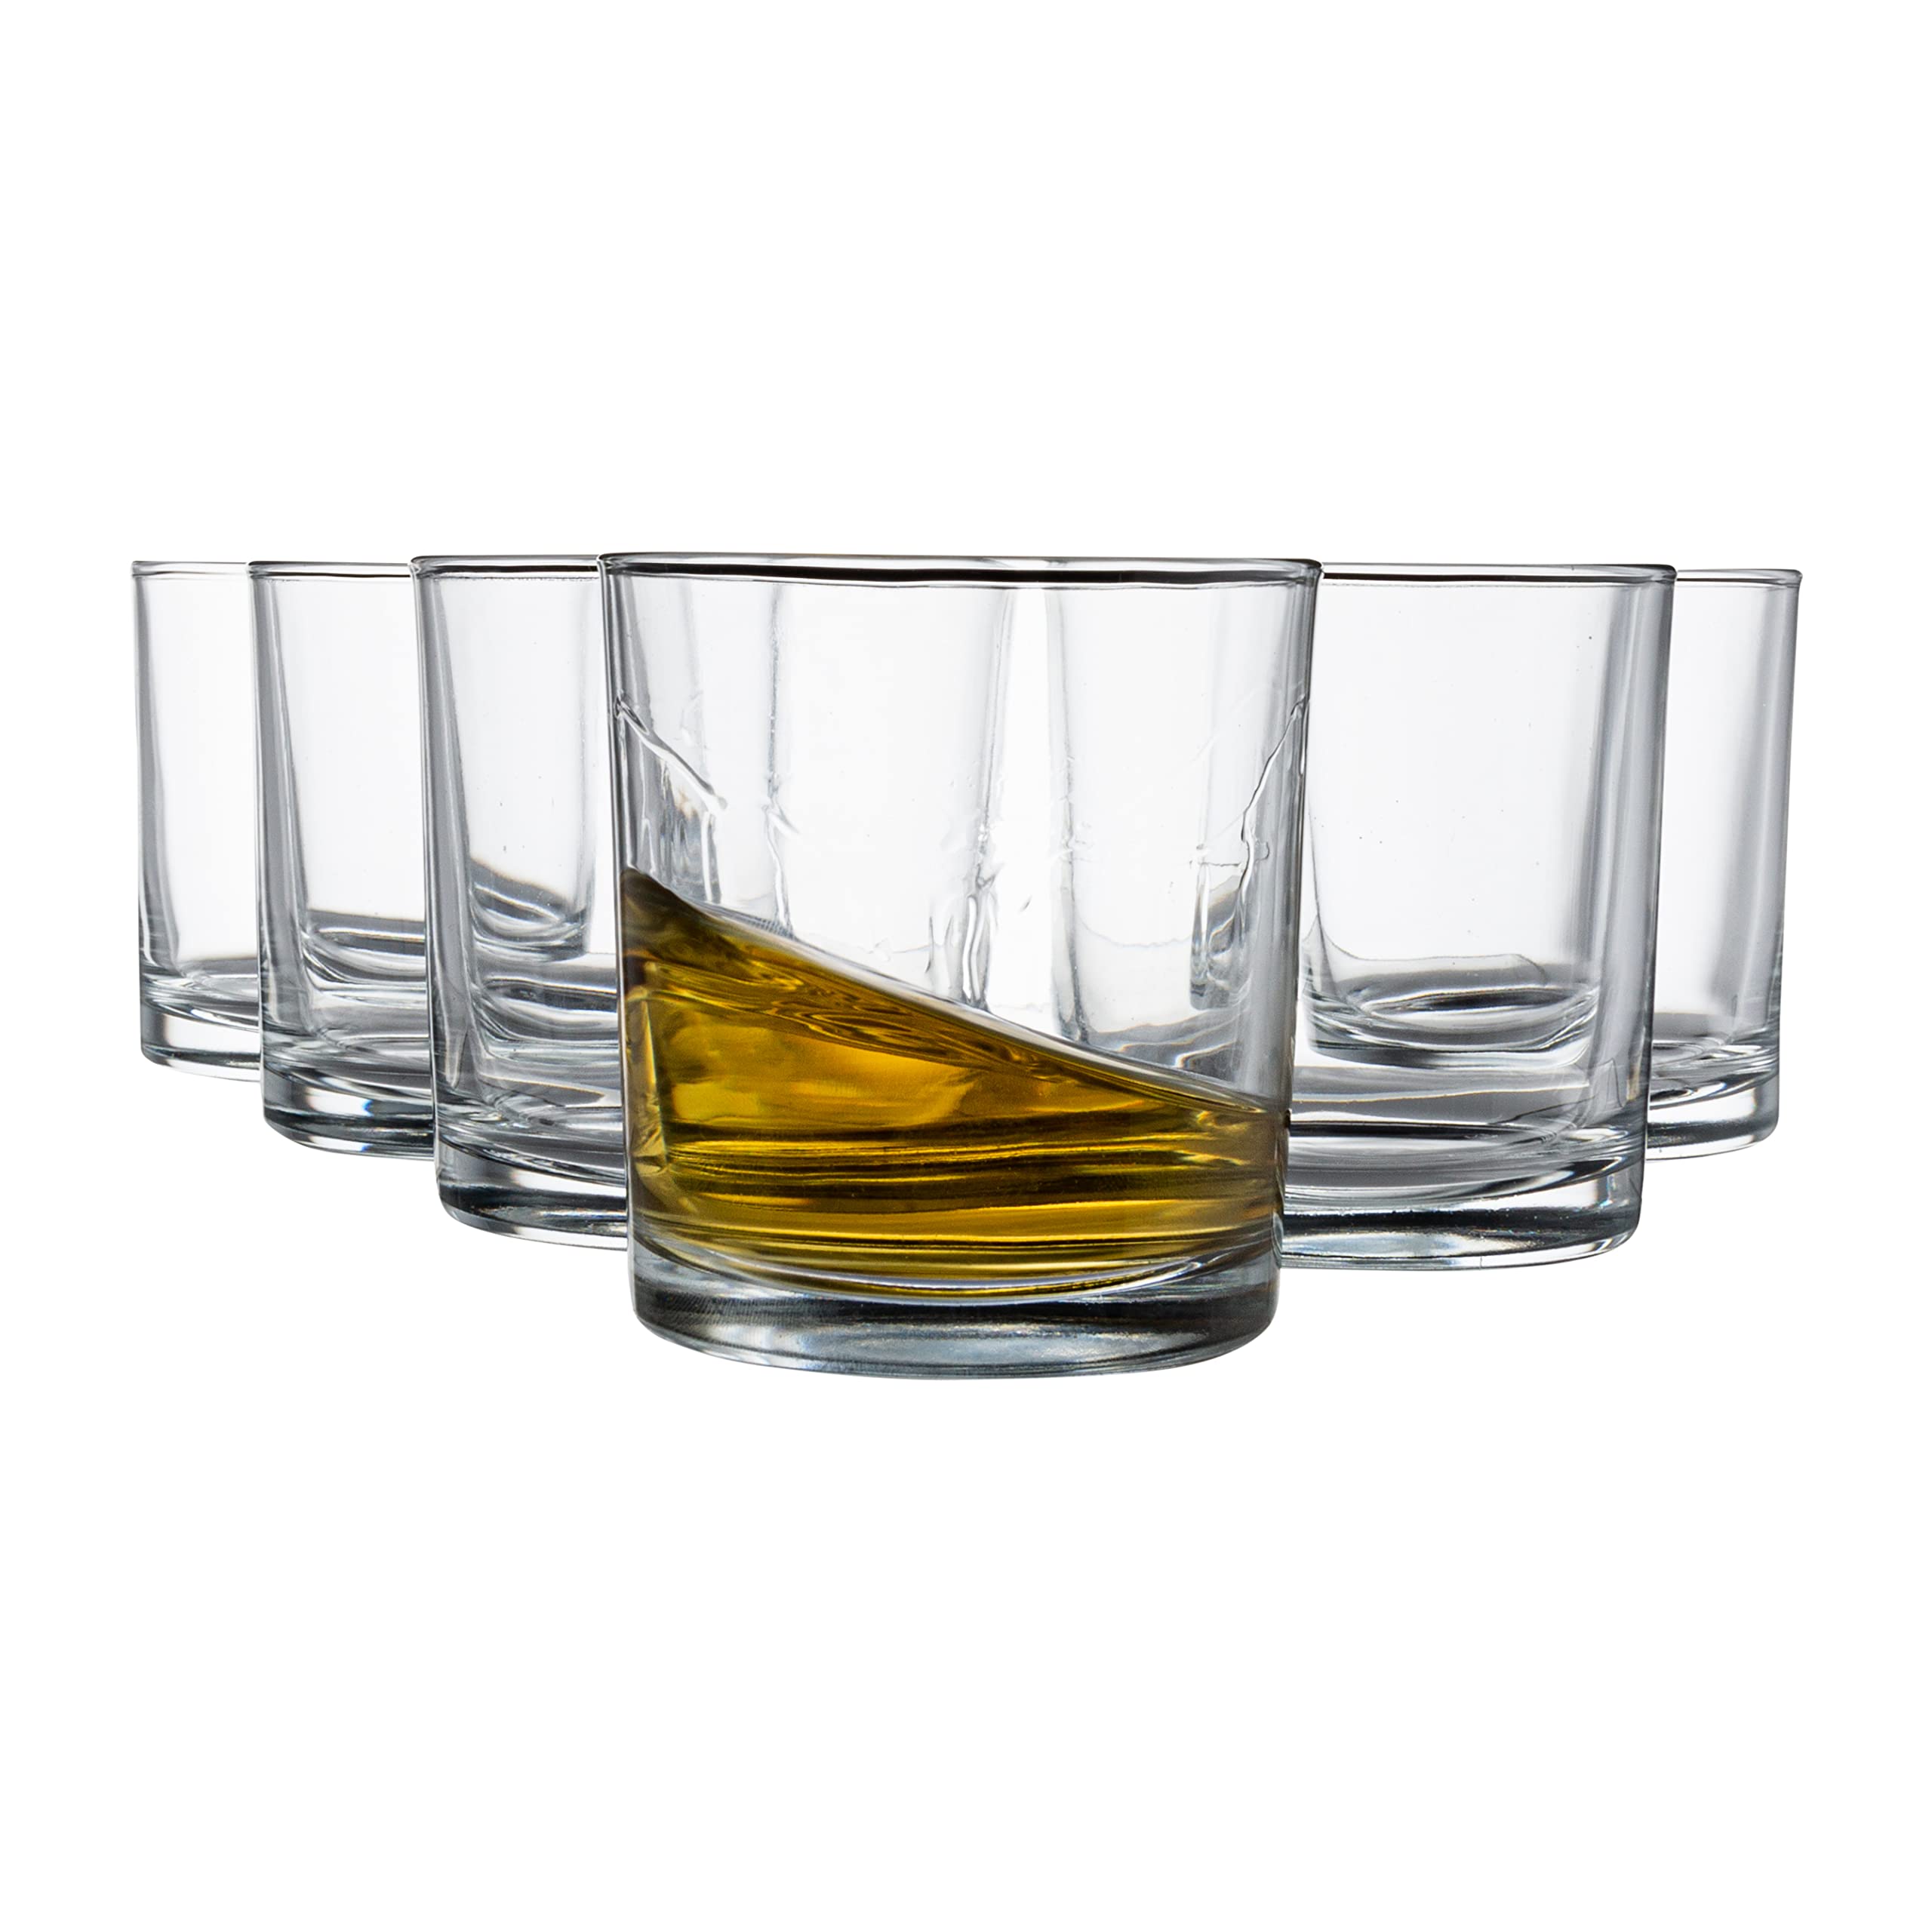 Vikko 8.25 Ounce Whiskey Glasses | Weighted Bottom to Prevent Tipping – Beautiful Seamless Construction – Set of 6 Large Glass Whisky Tumblers